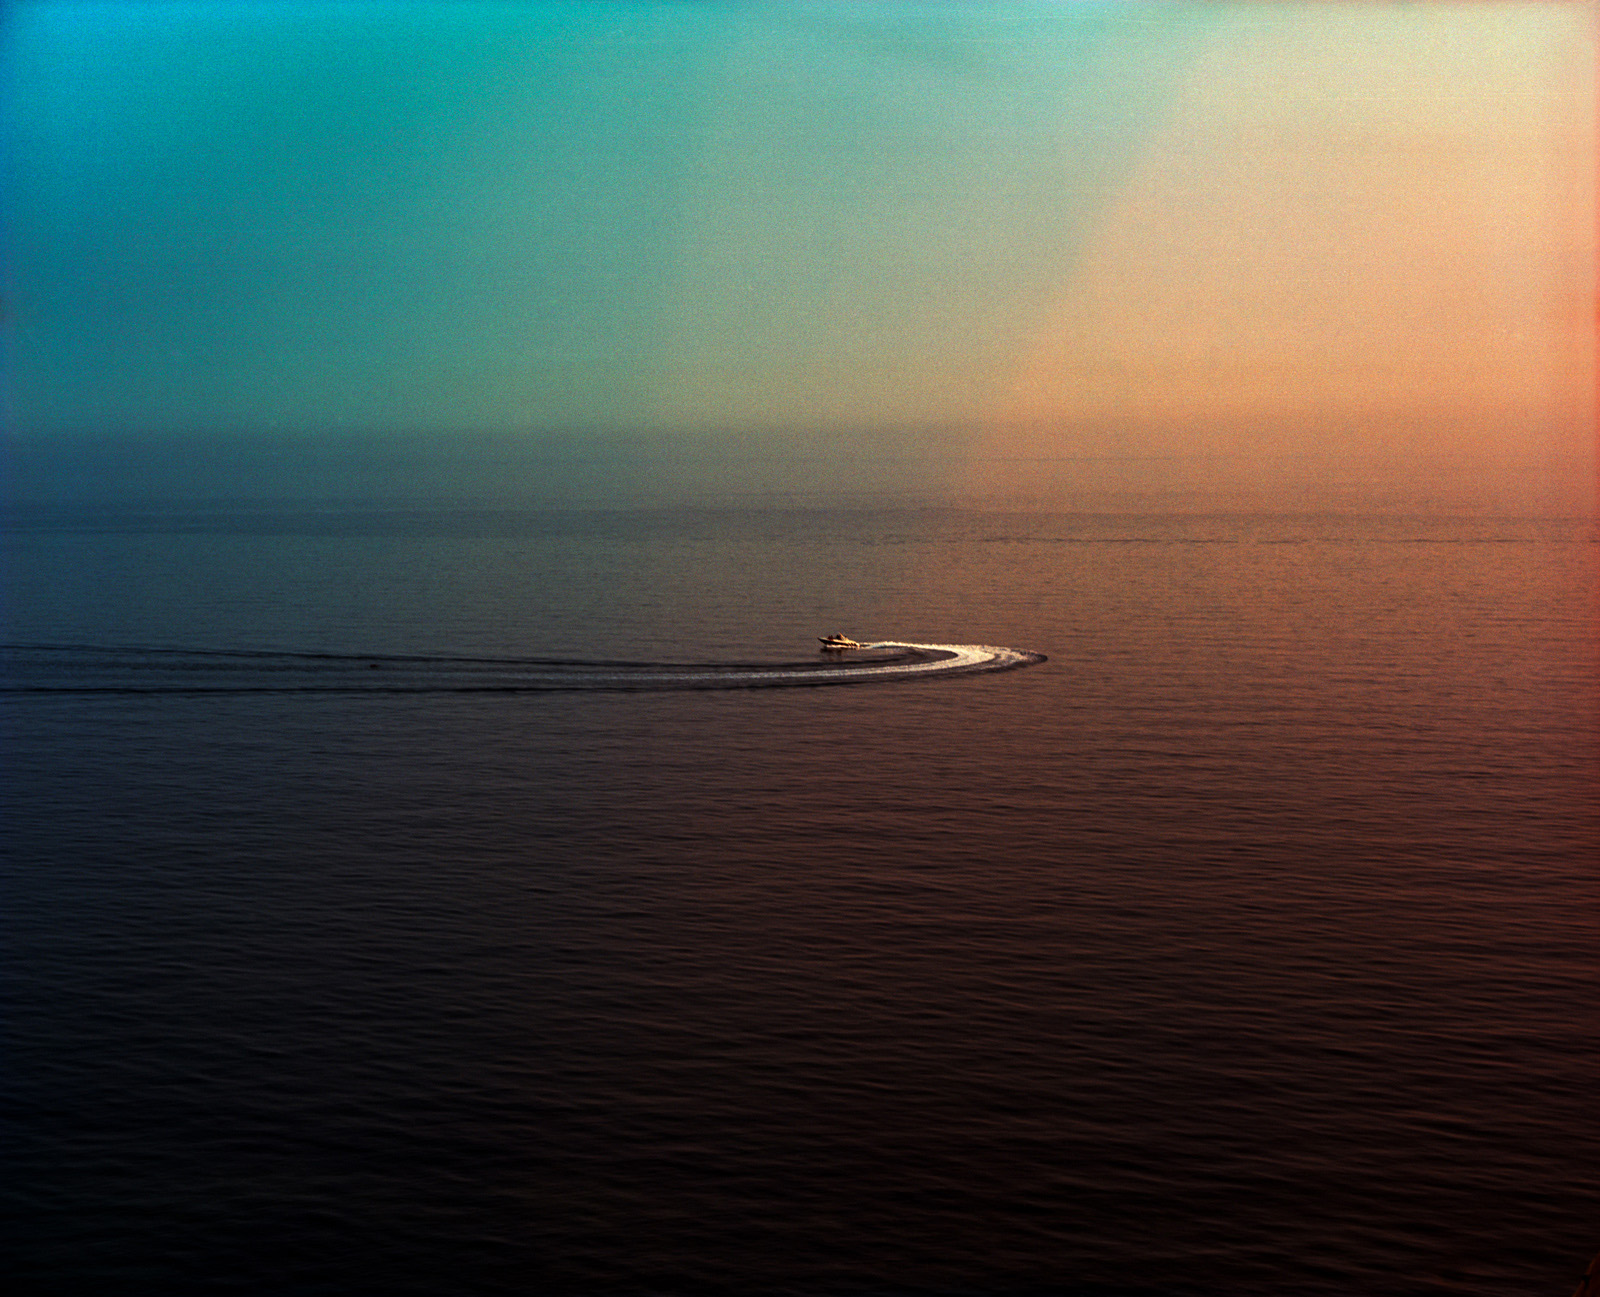 Speed boat on the open sea at sunset, analogue photography.